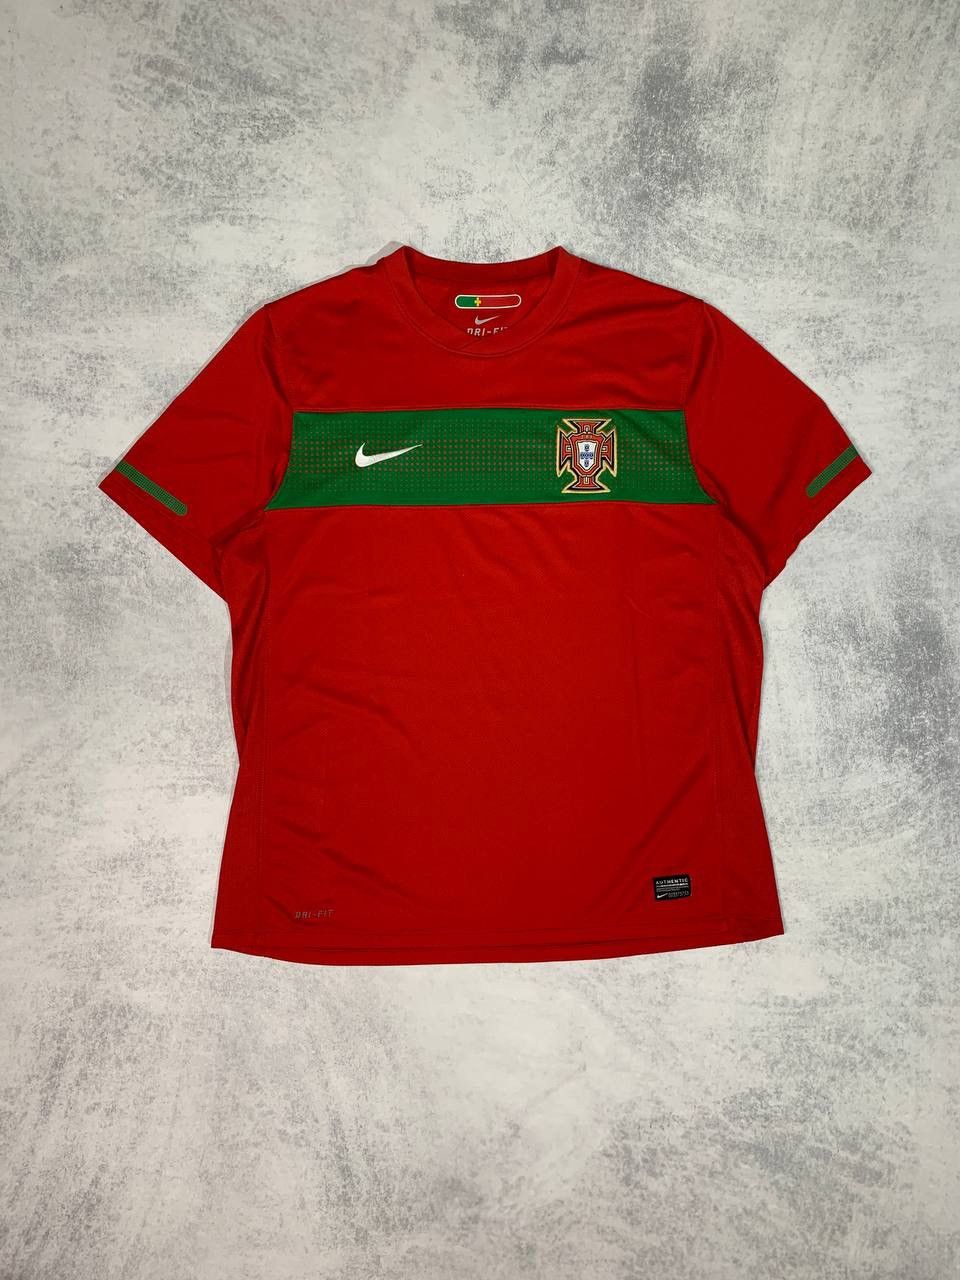 Pre-owned Nike X Soccer Jersey Nike Portugal Blokecore Style Man Soccer Jersey In Red